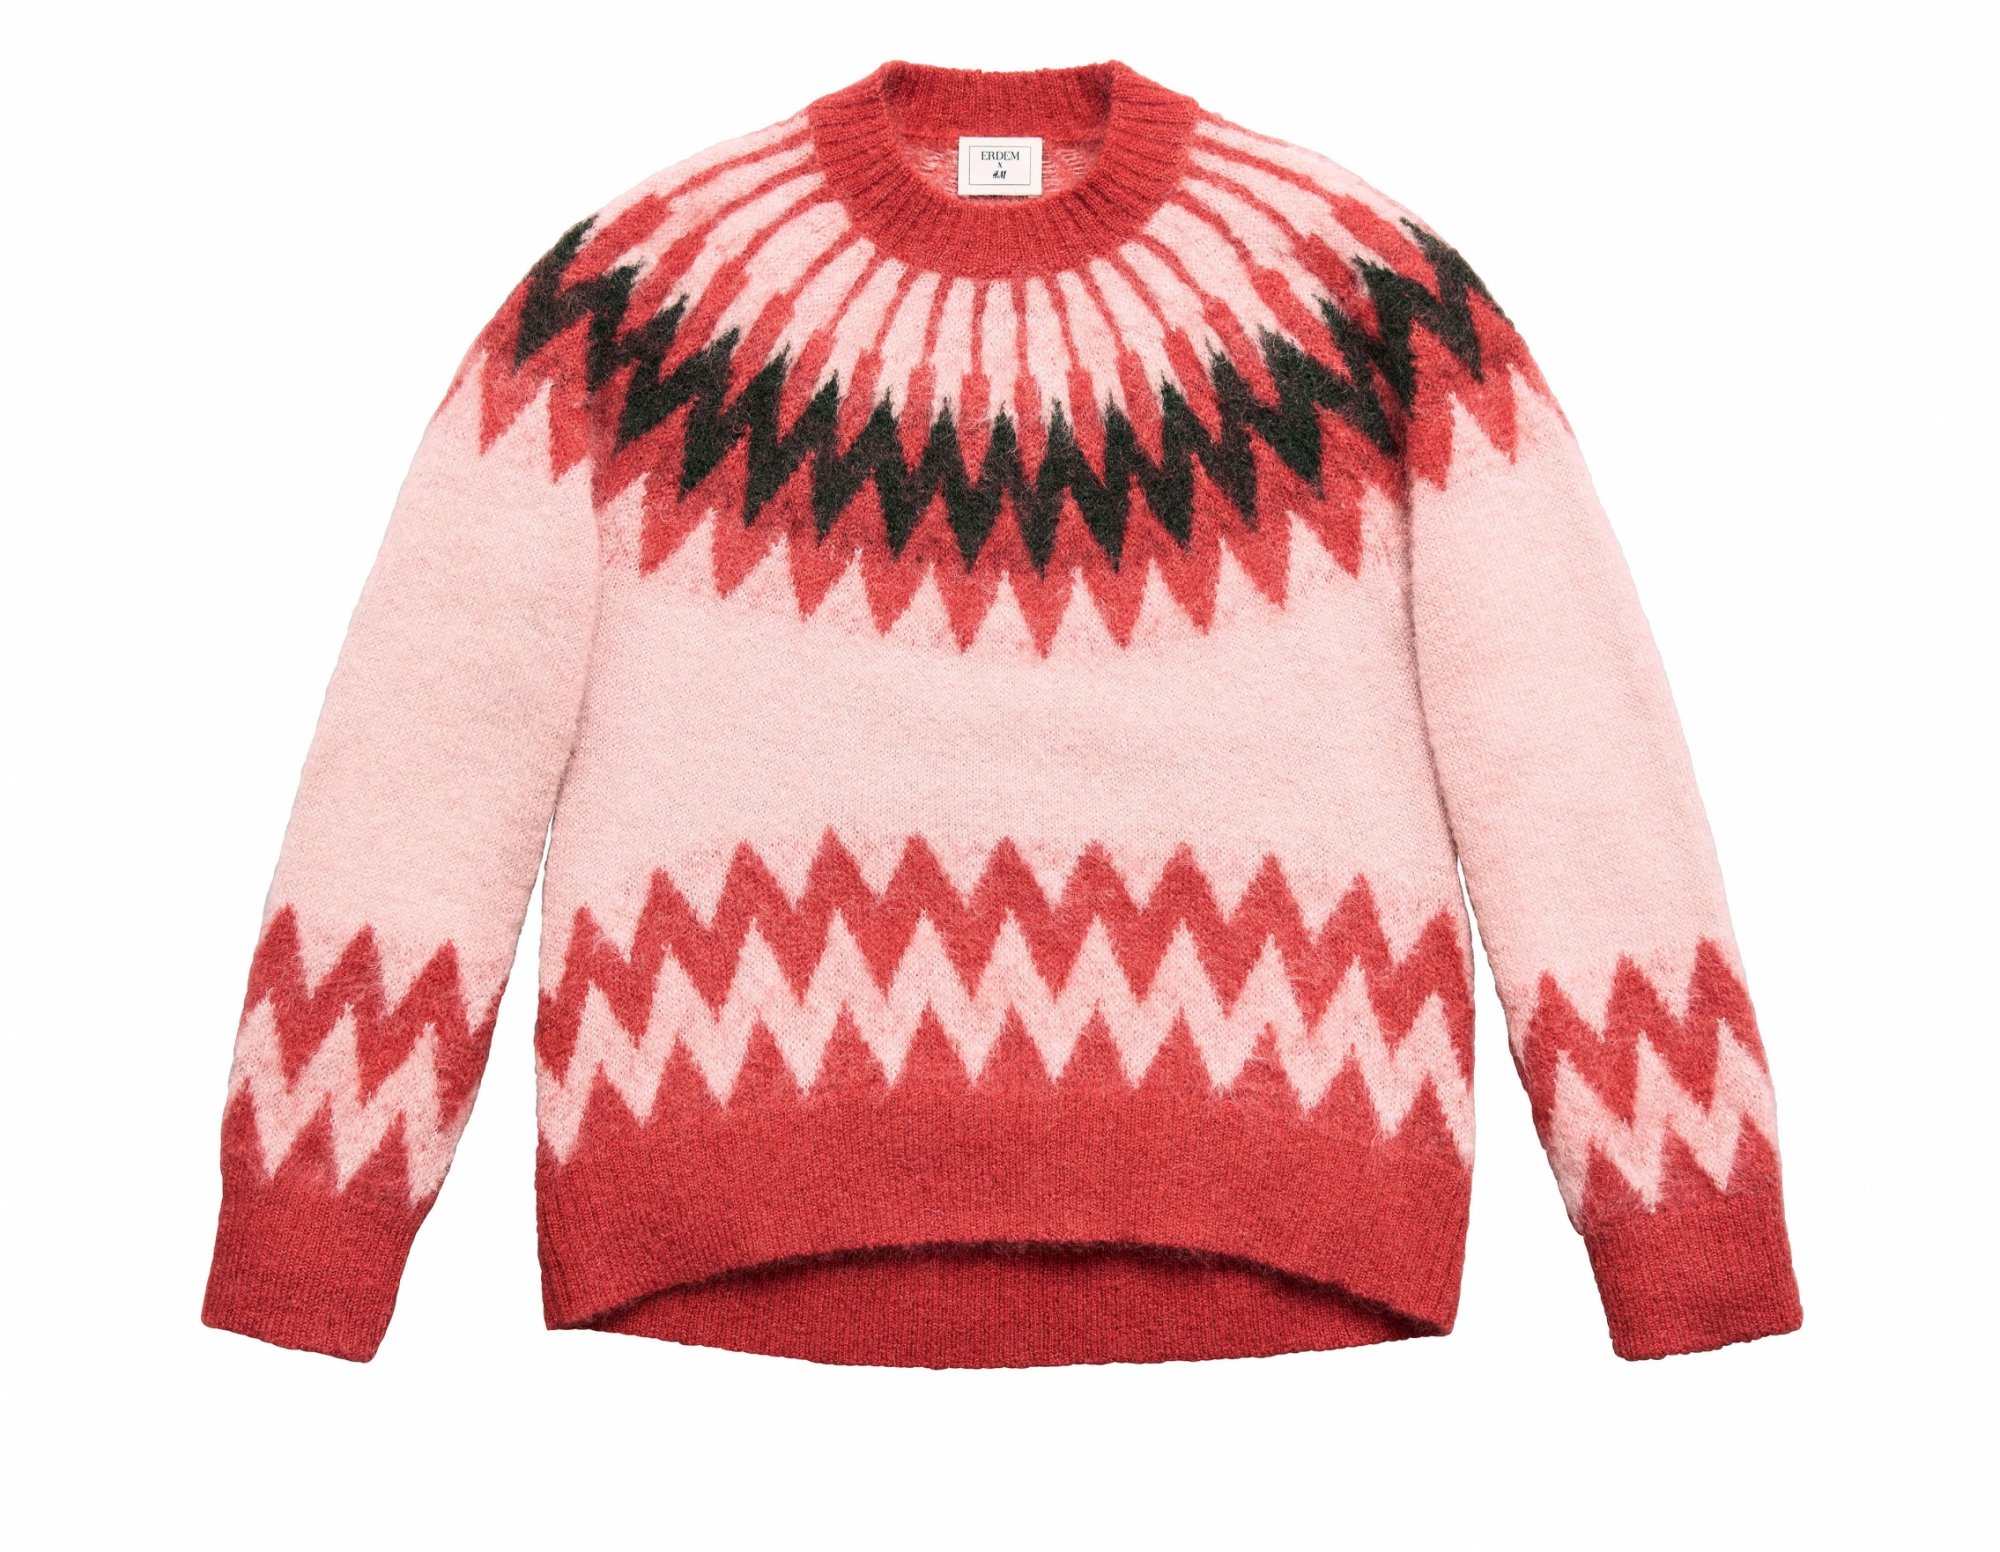 mountain style sweater in declination of pink